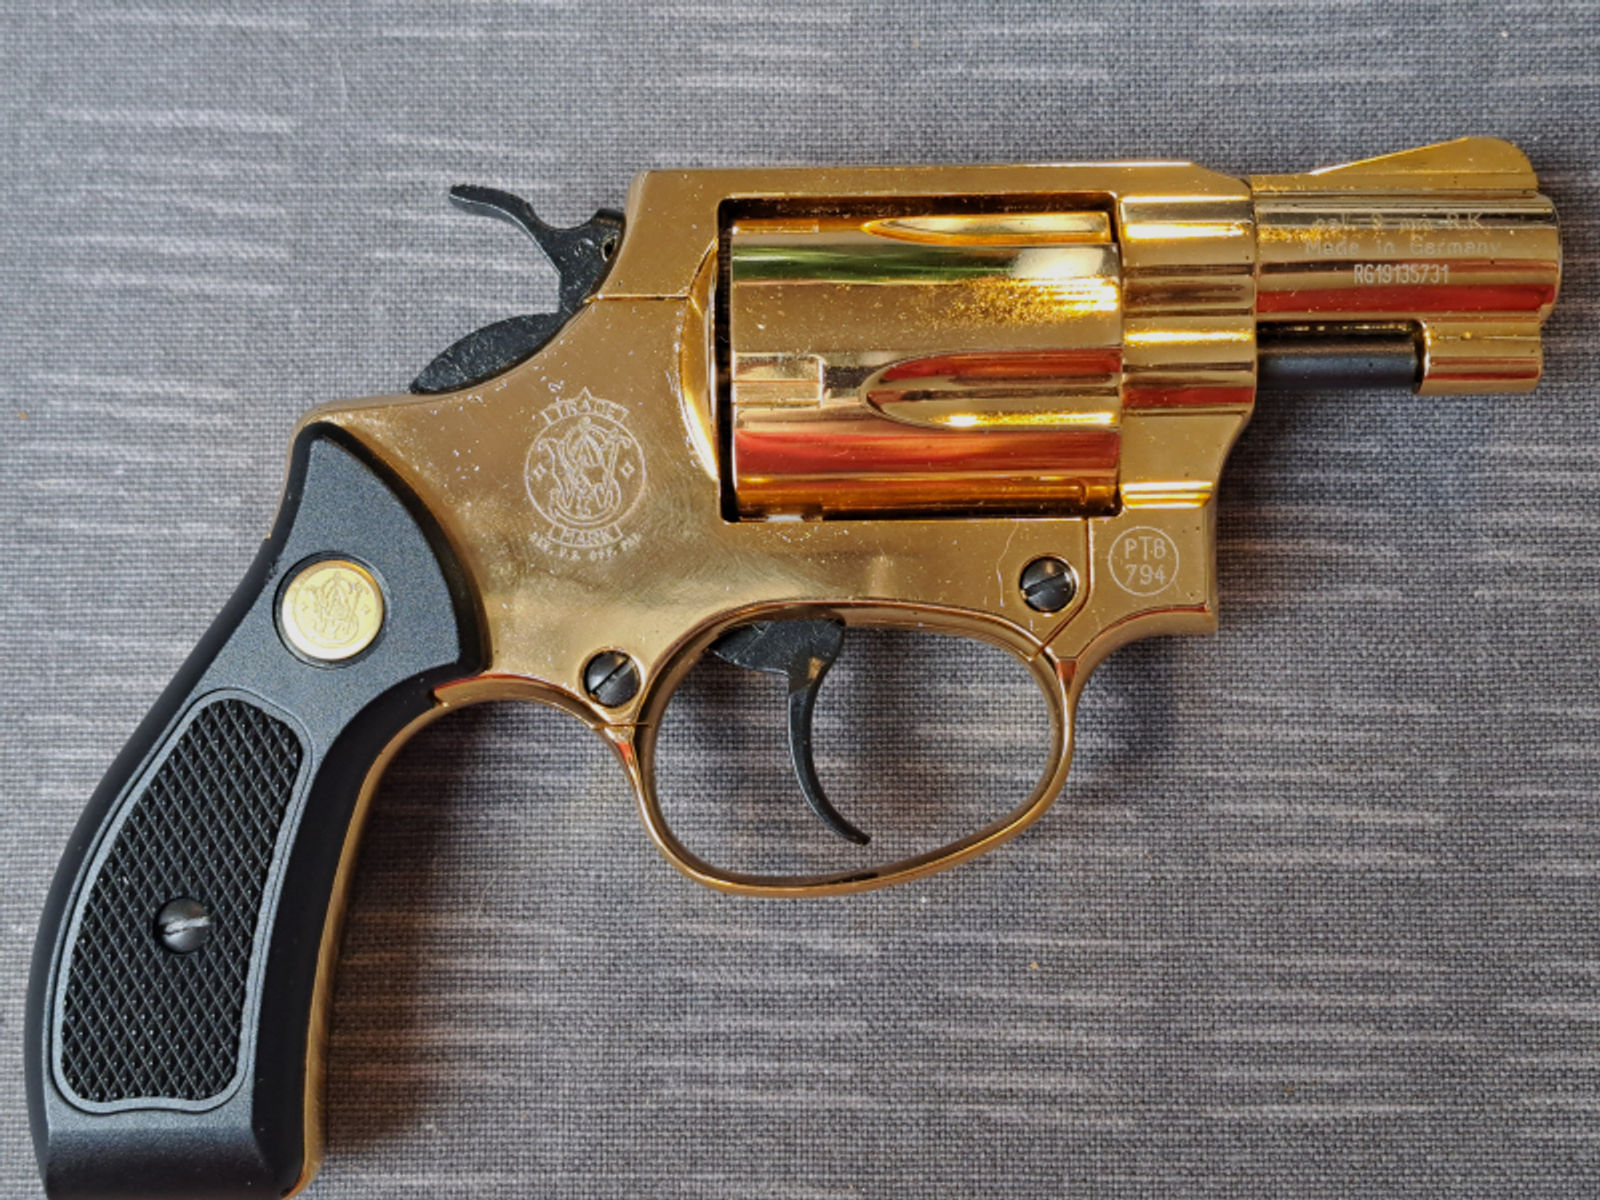 Smith & Wesson Chief Special Gold